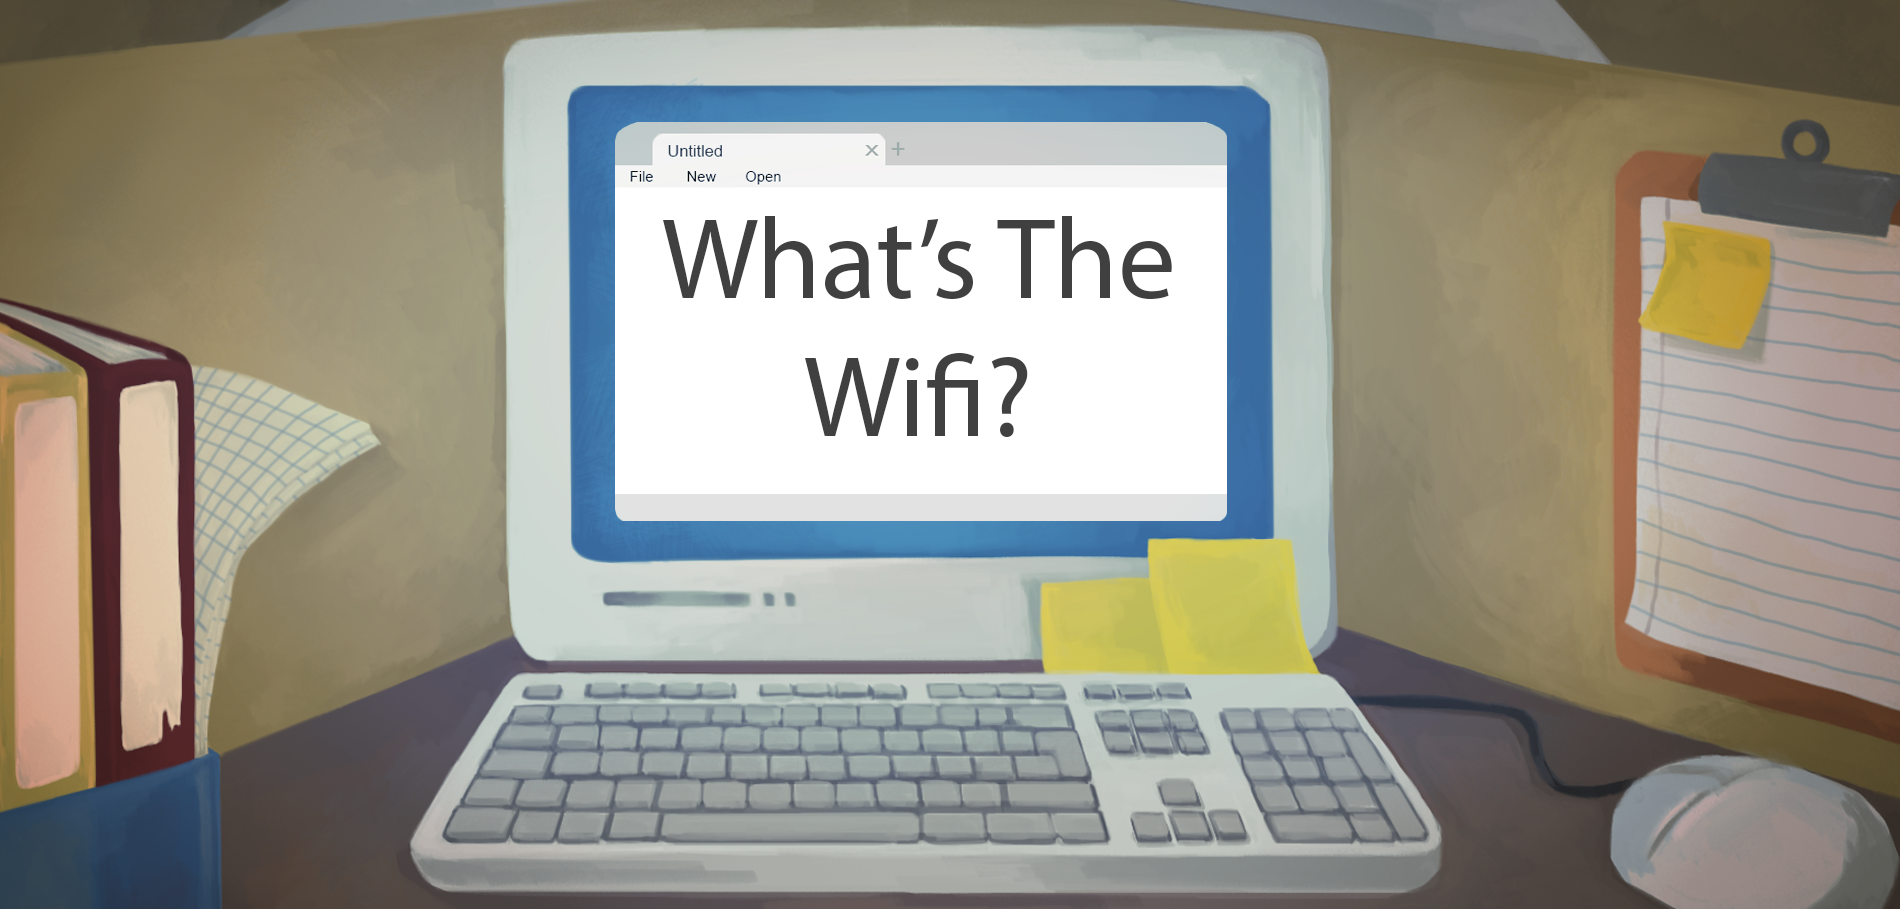 What's The Wifi?